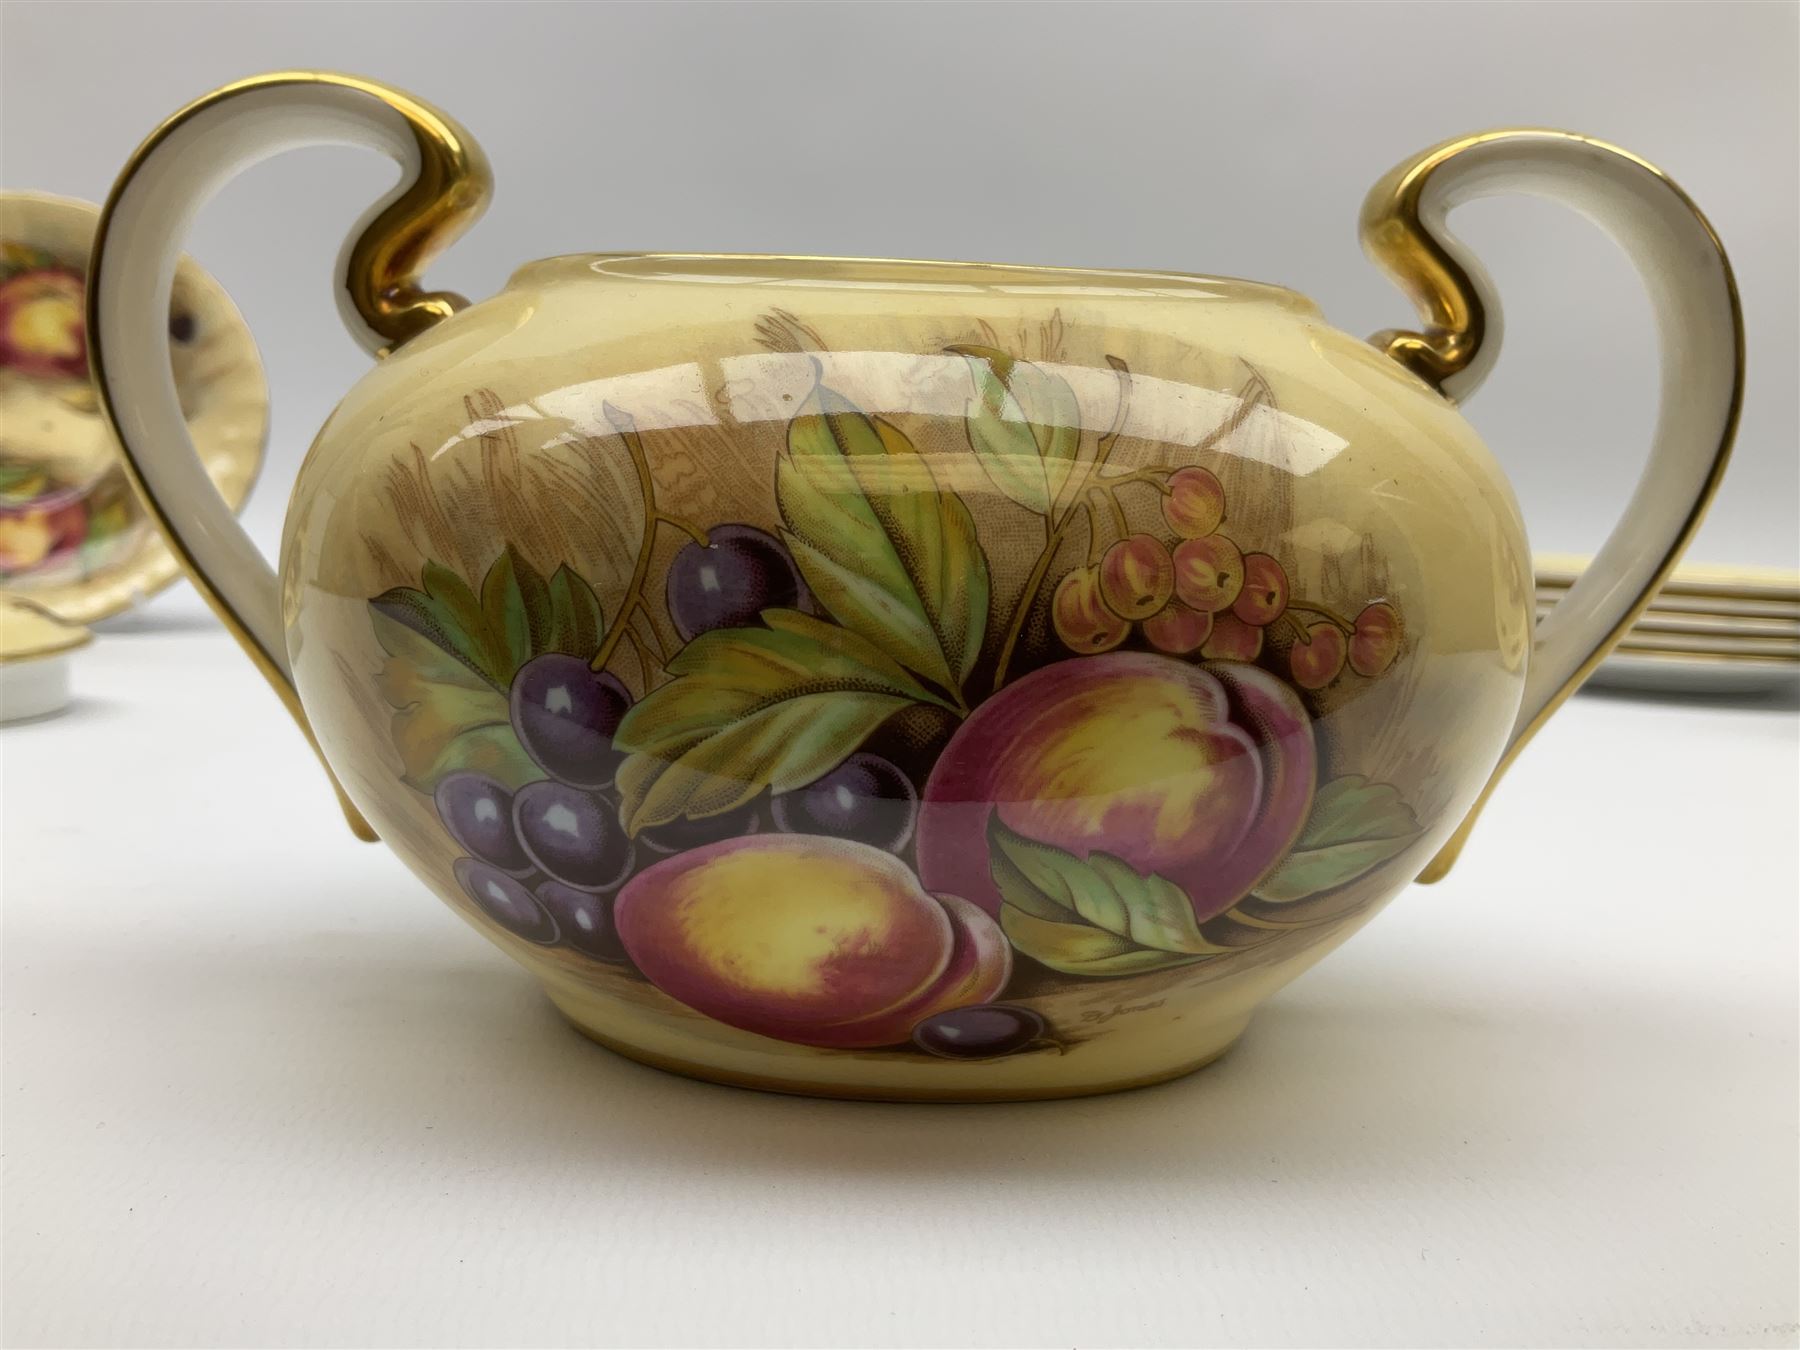 Aynsley Orchard Gold pattern teawares - Image 6 of 21